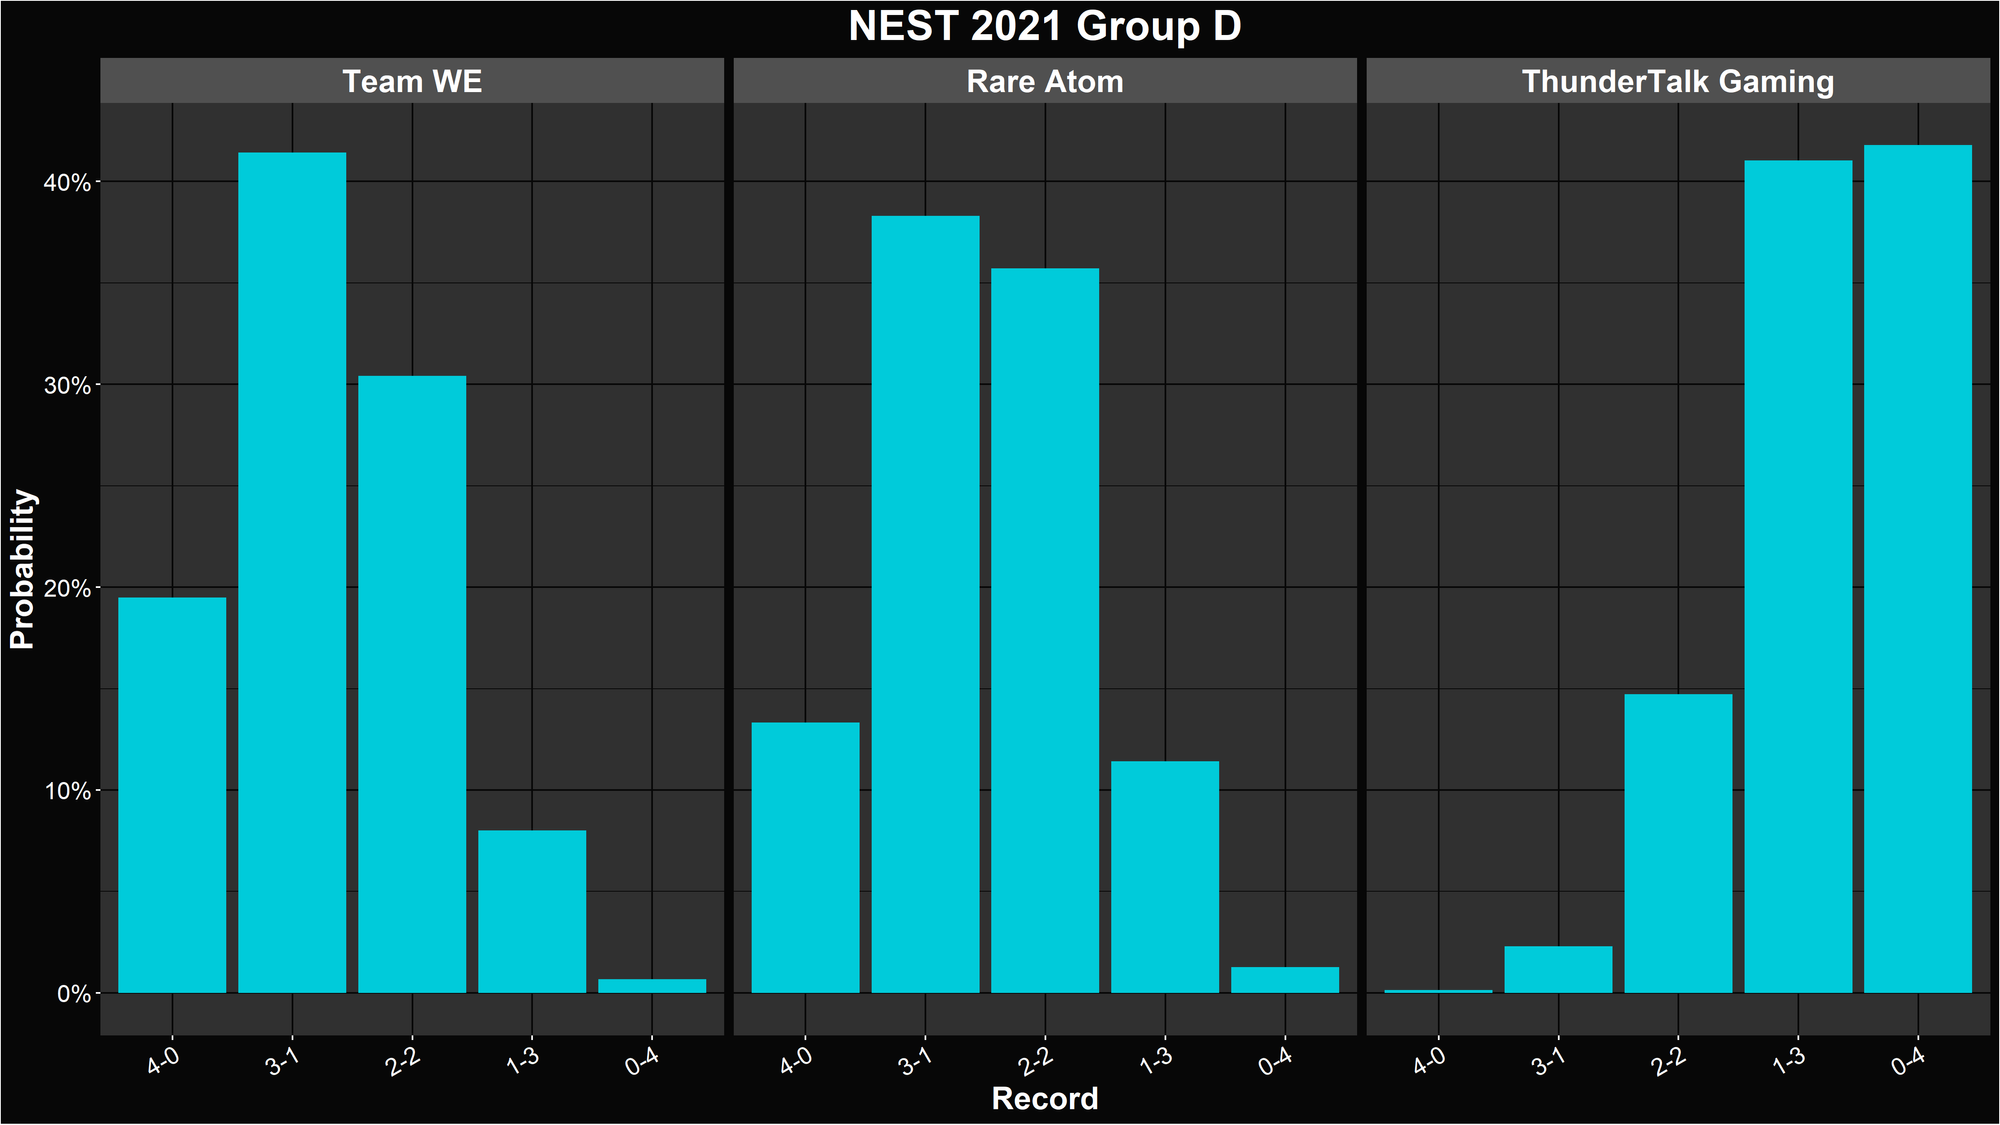 Alacrity's NEST 2021 Group D Record Distributions